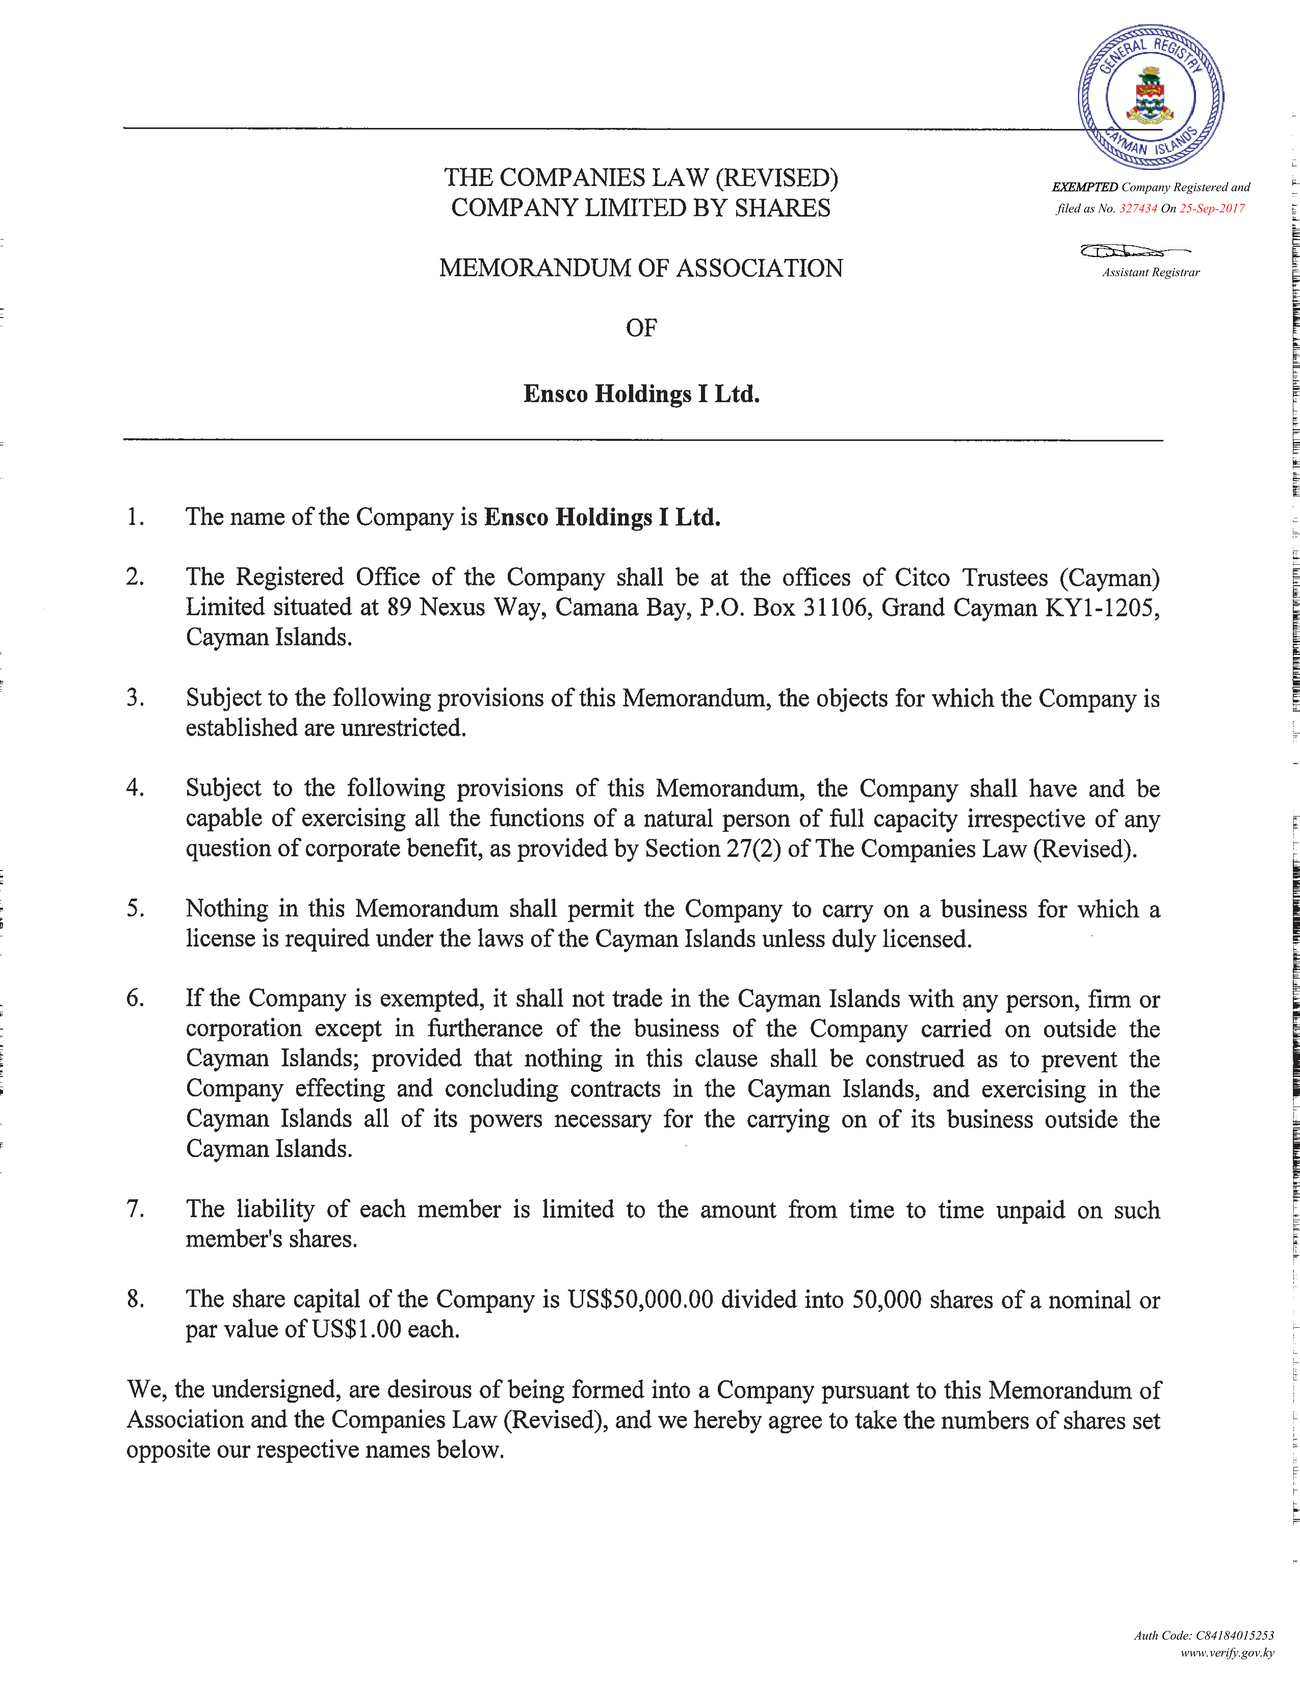 New Microsoft Word Document_page003page018page002 memorandum of association of ensco holdings i ltd_page001.jpg